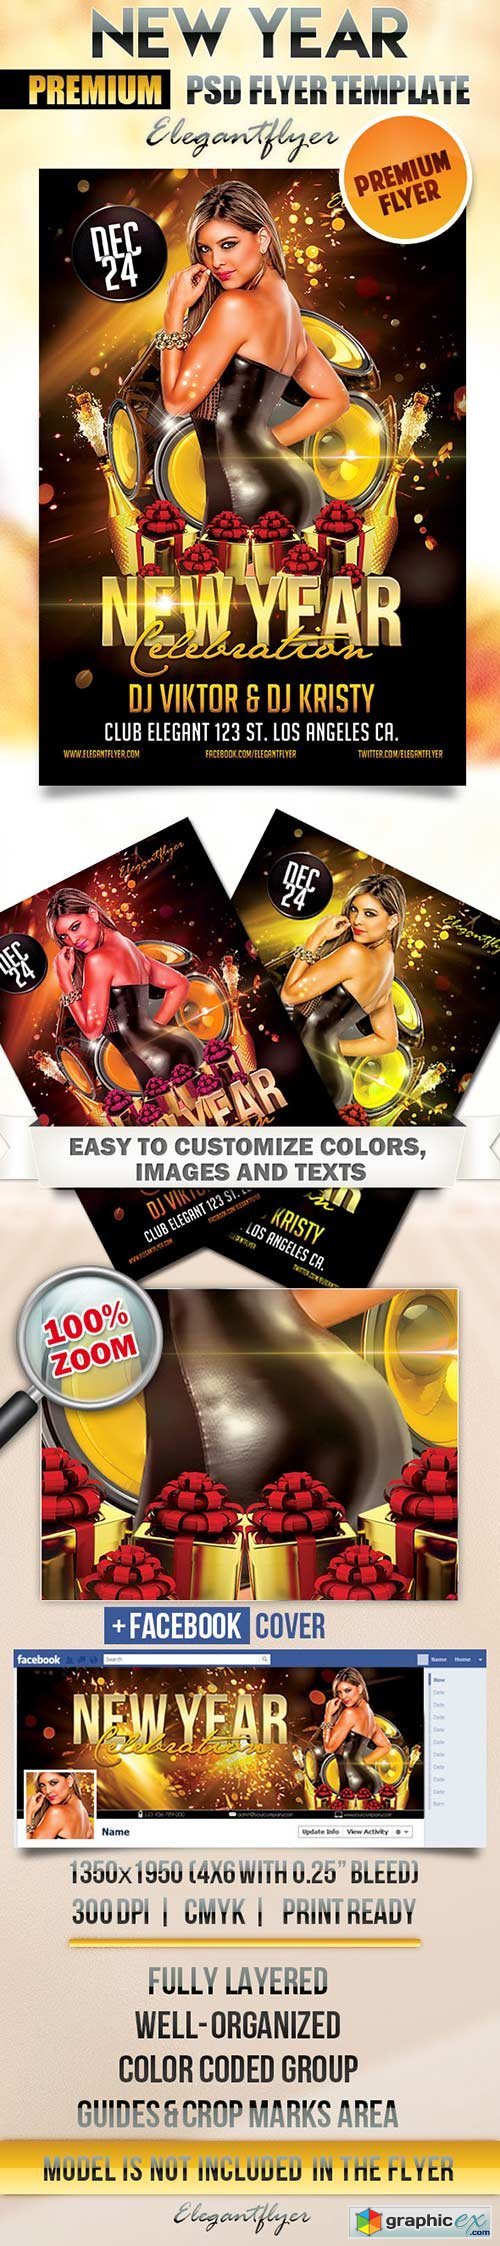 New Year Celebration Flyer PSD Template + Facebook Cover